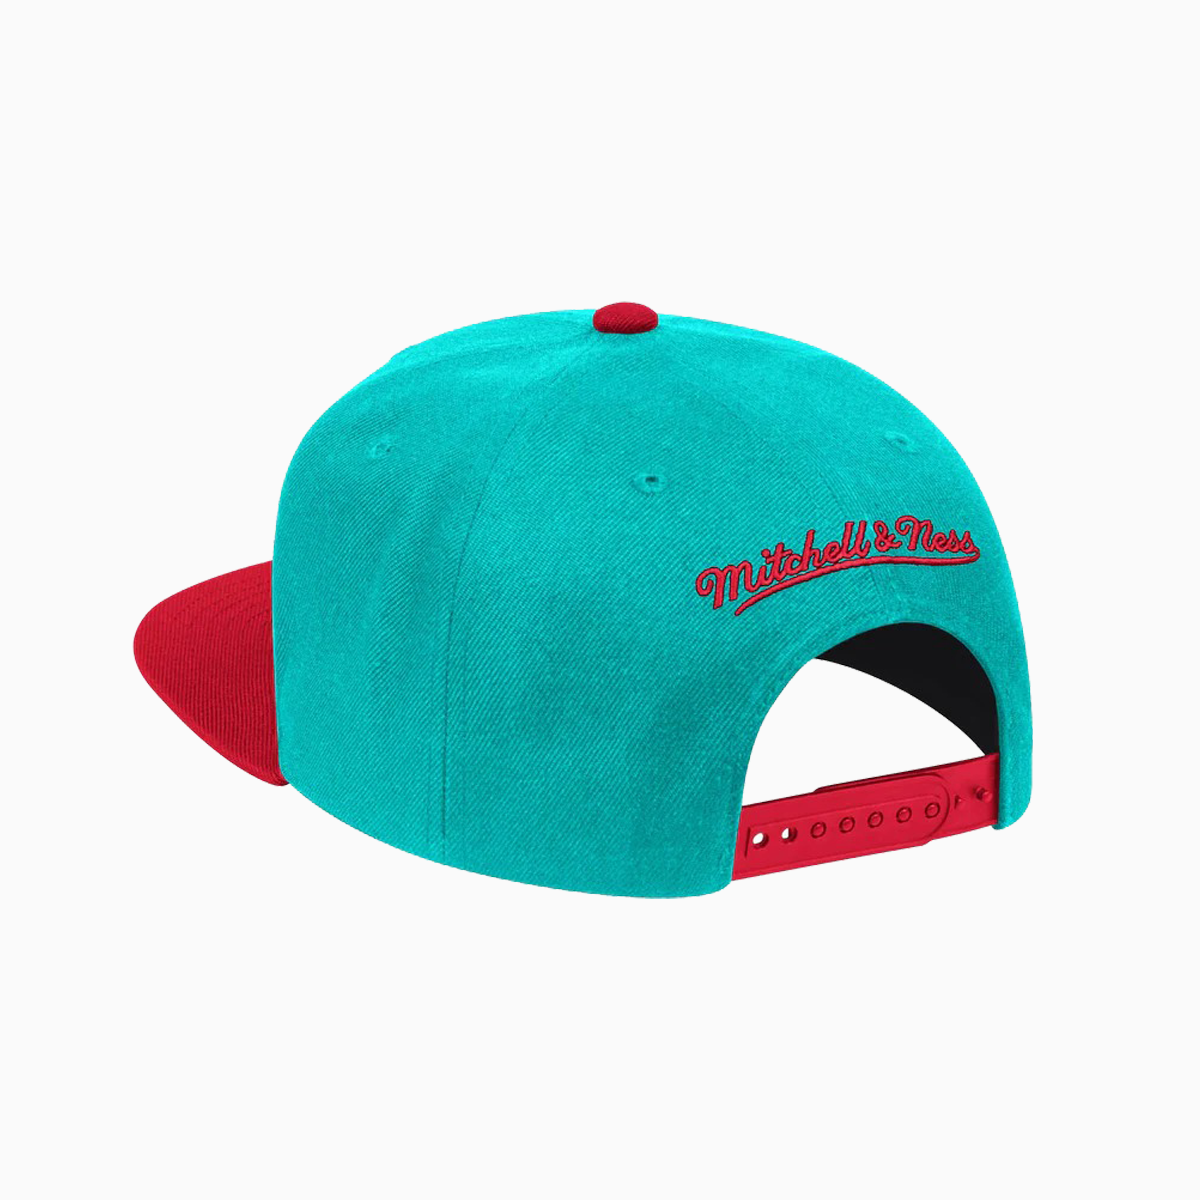 mitchell-and-ness-vancouver-grizzlies-hwc-wool-2-tone-nba-snapback-hat-6hssmm19200-vgrteal